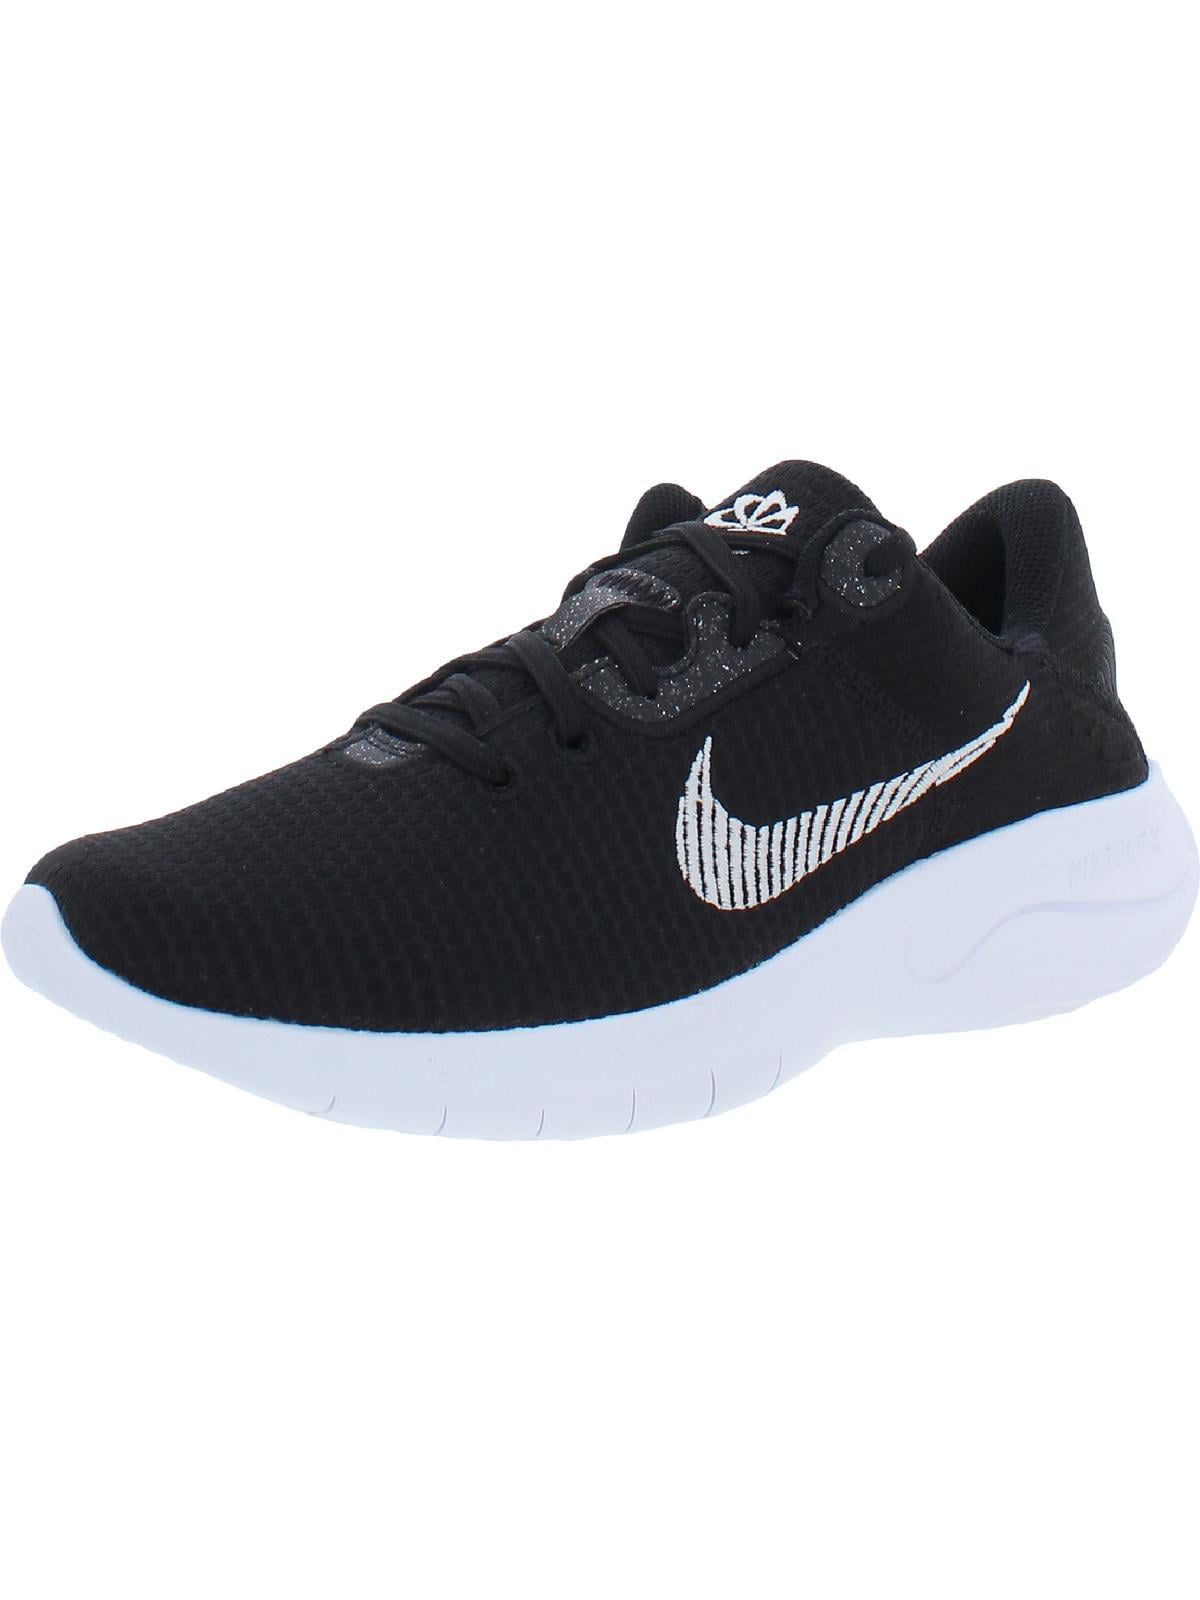 Nike Womens Flex Experience RN 11 NN Fitness Workout Running Shoes